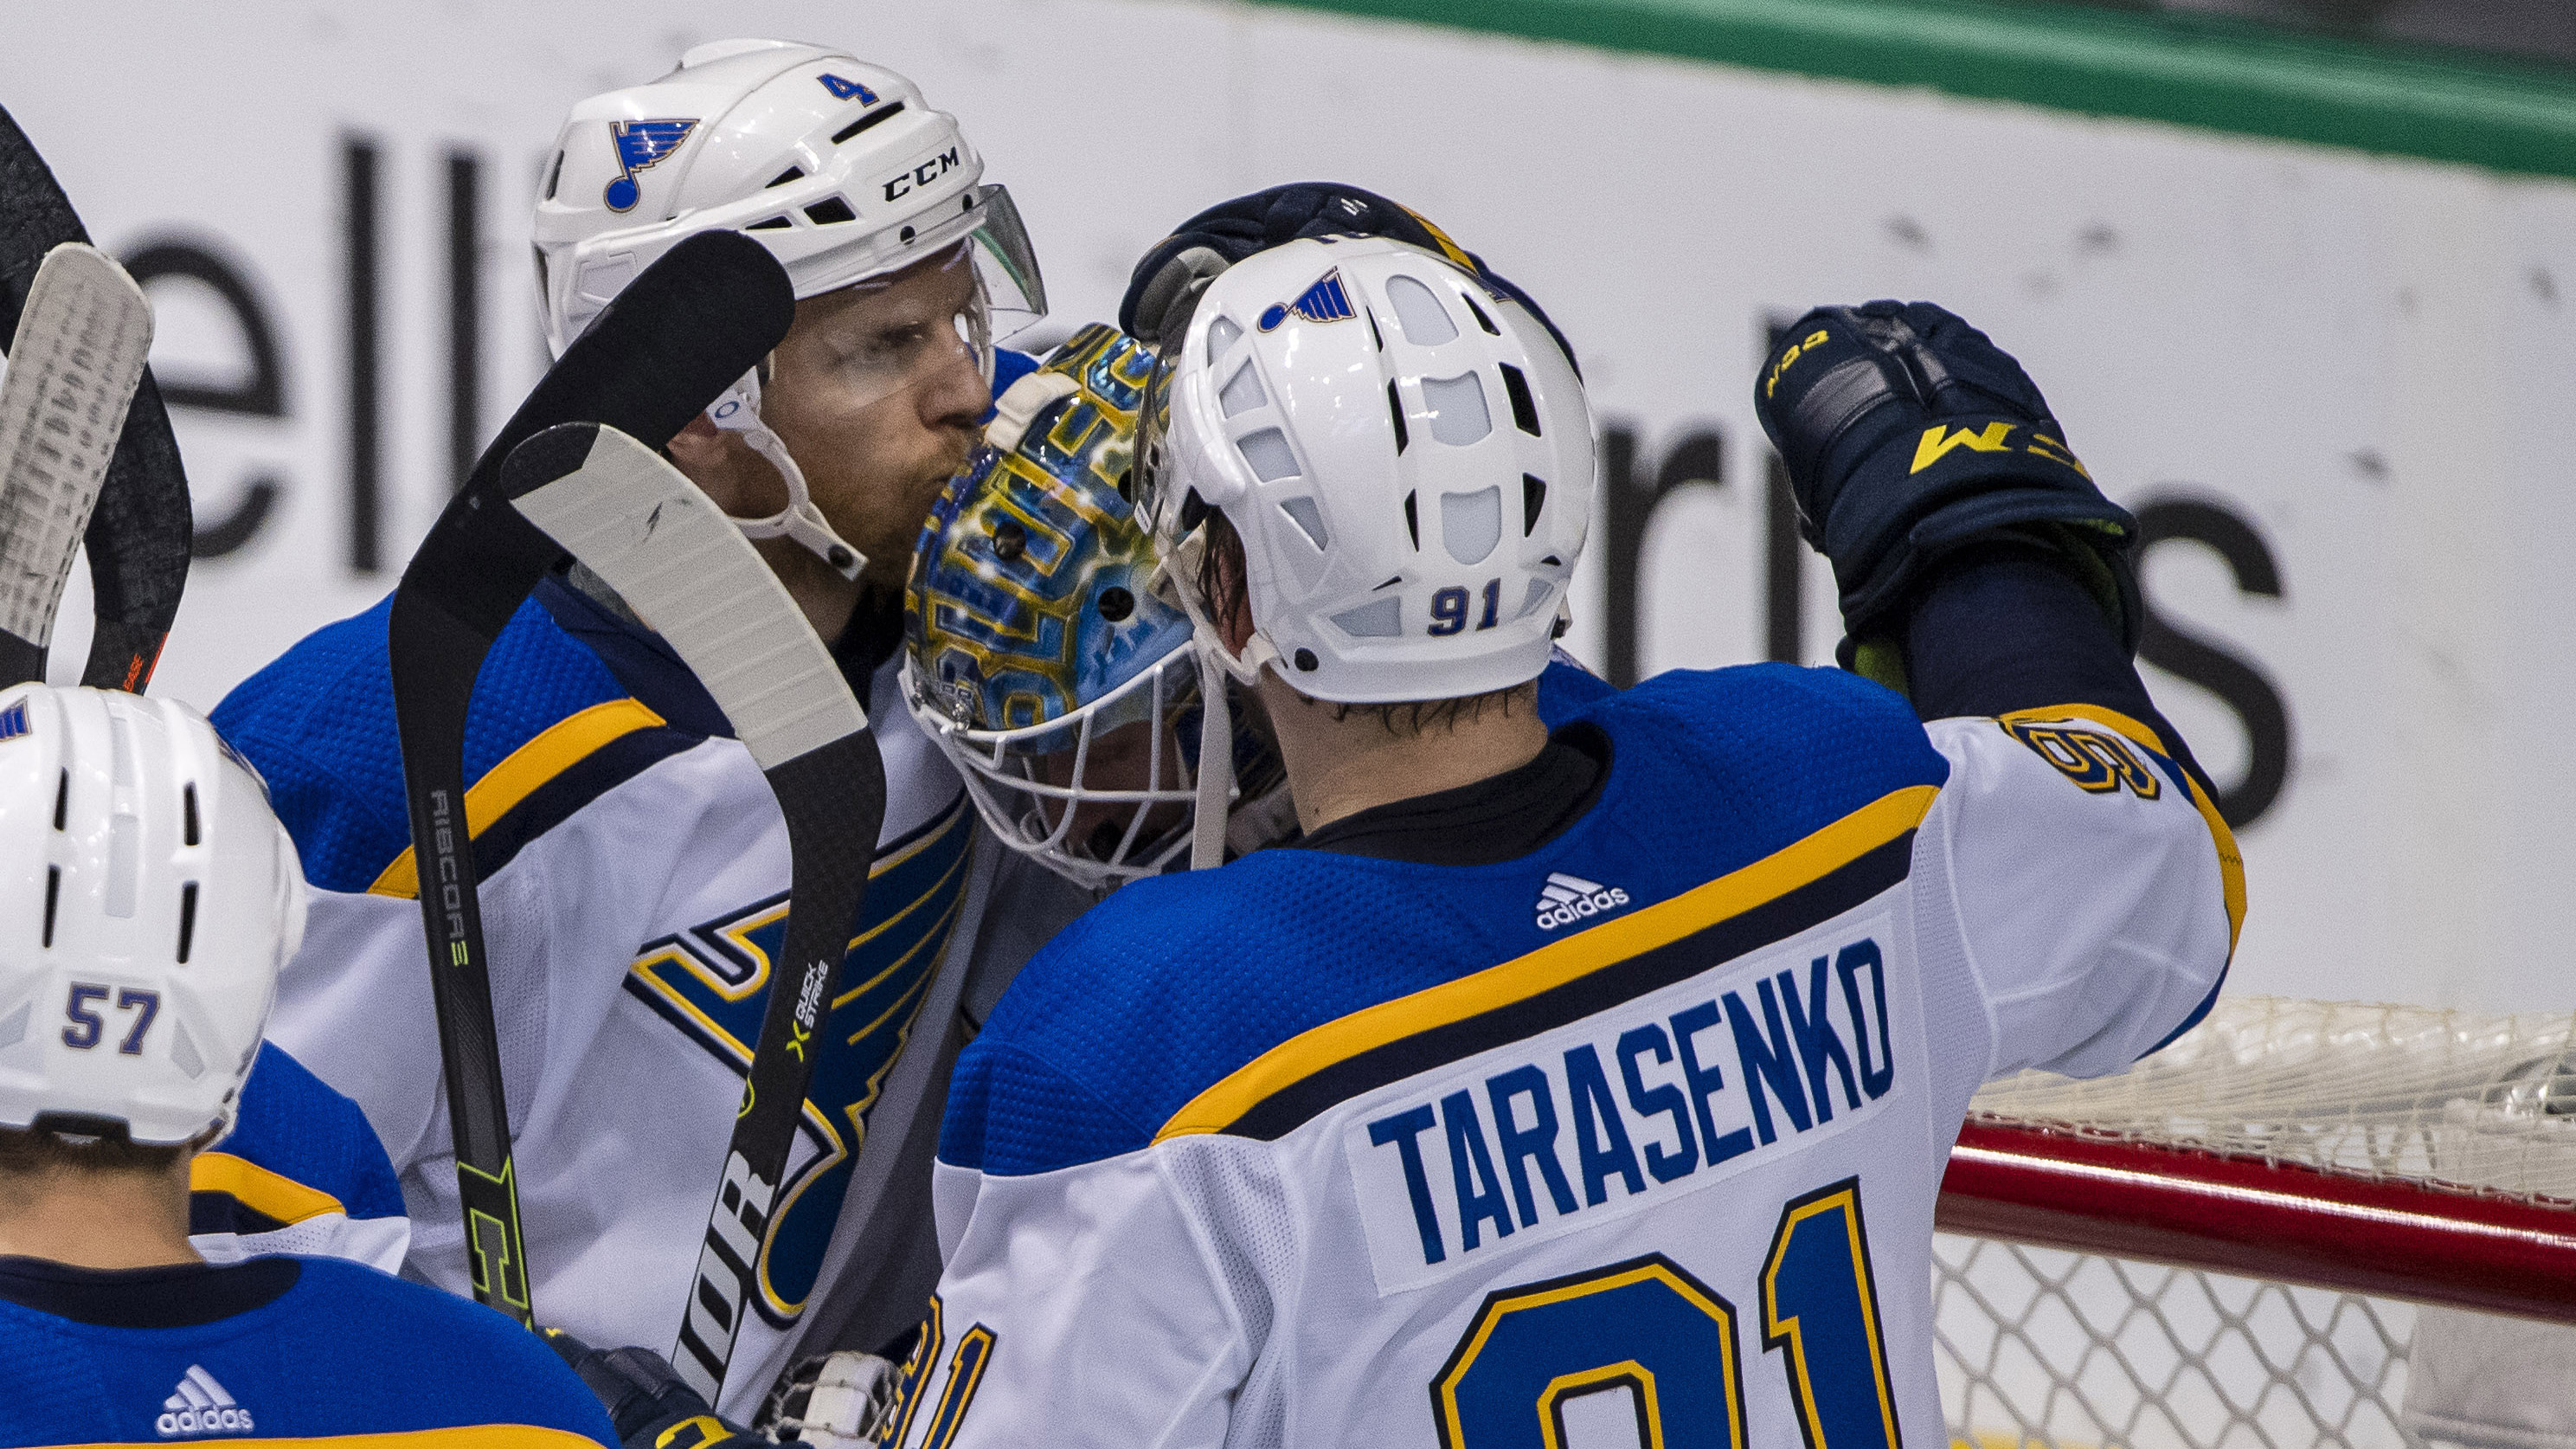 Blues force Game 7 with 4-1 win over Stars in Dallas